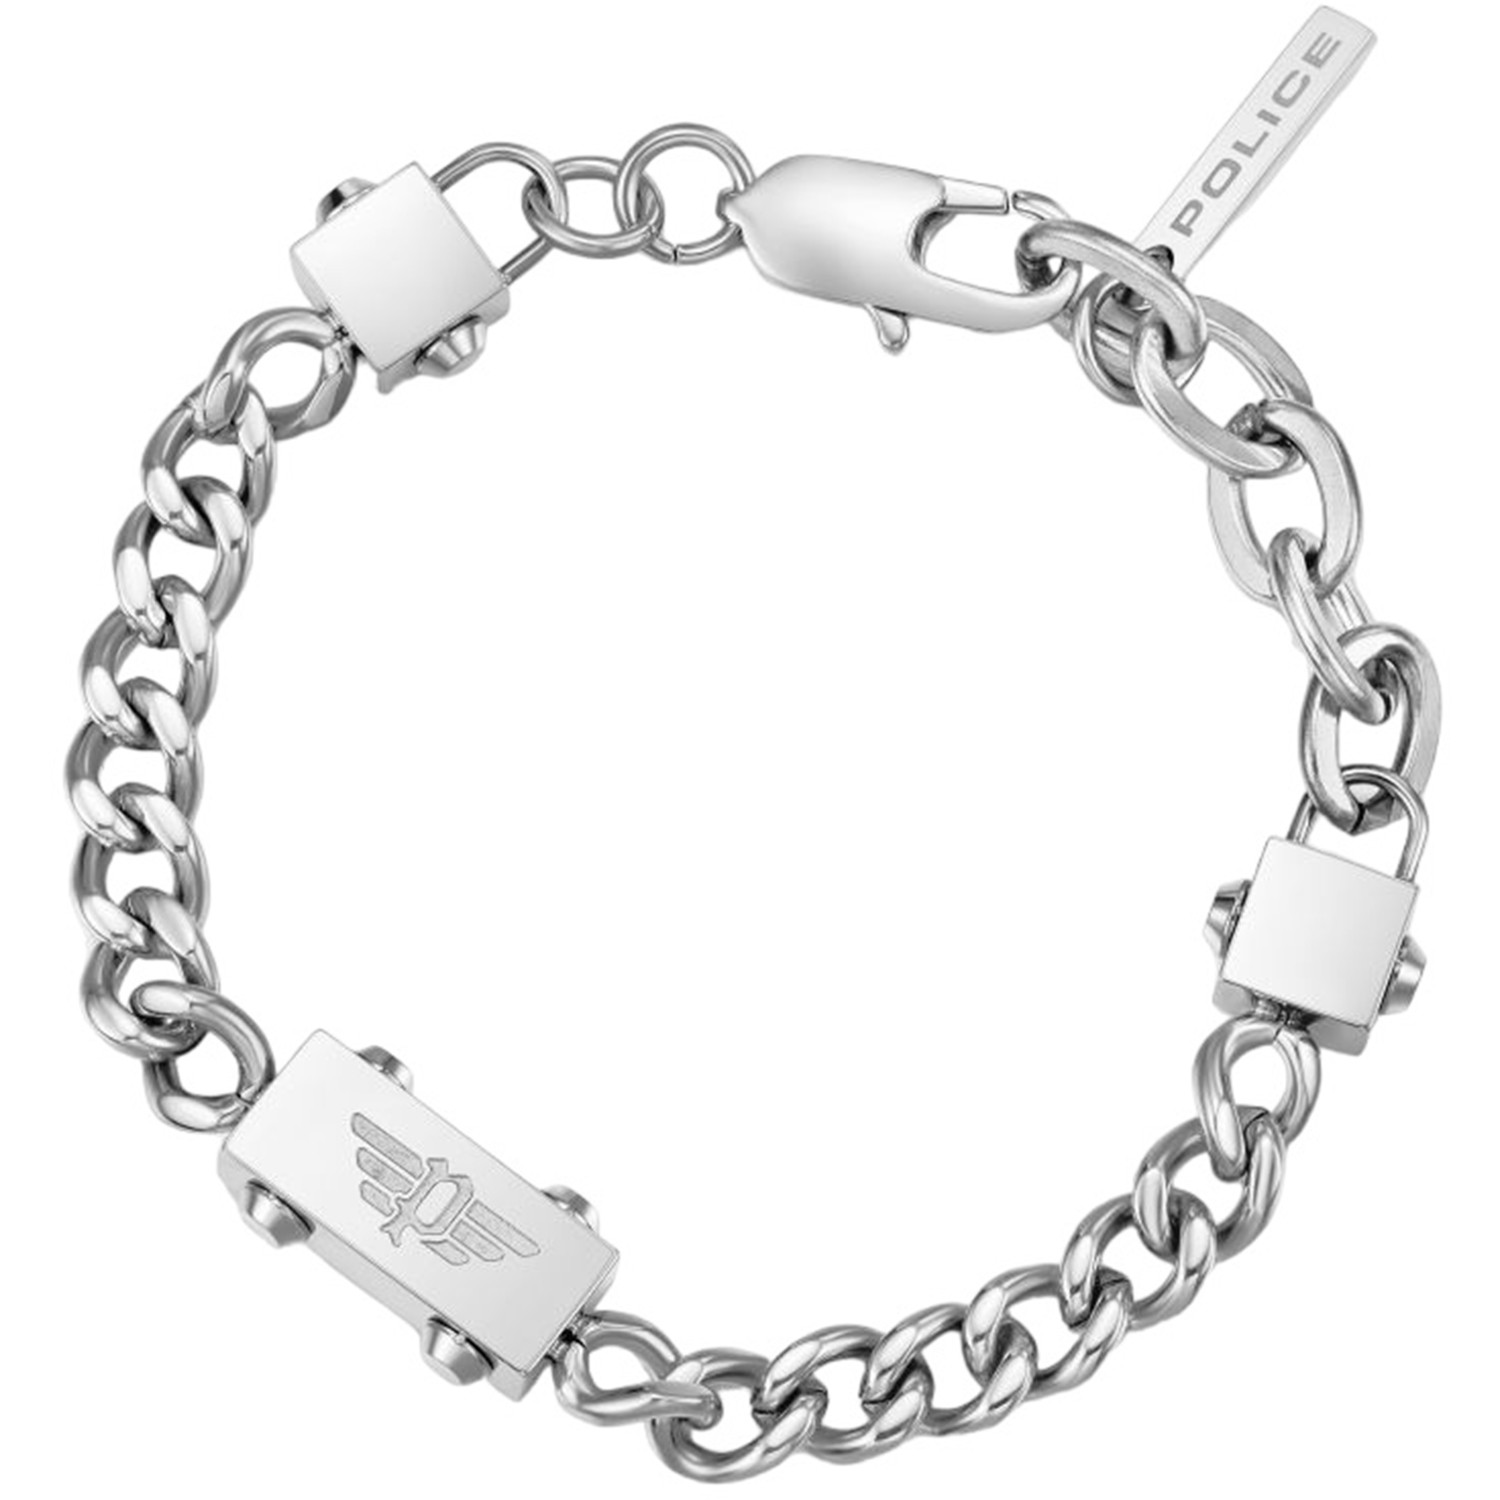 Police Men\'s Bracelets Police Men\'s Stainless Barato Bracelets Comprar Stainless CHAINED Clicktime.eu» PEAGB0002102 Comprar PEAGB0002102 Police Silver online Silver PEAGB0002102 Bracelets CHAINED | | Men\'s Steel Bracelets Steel